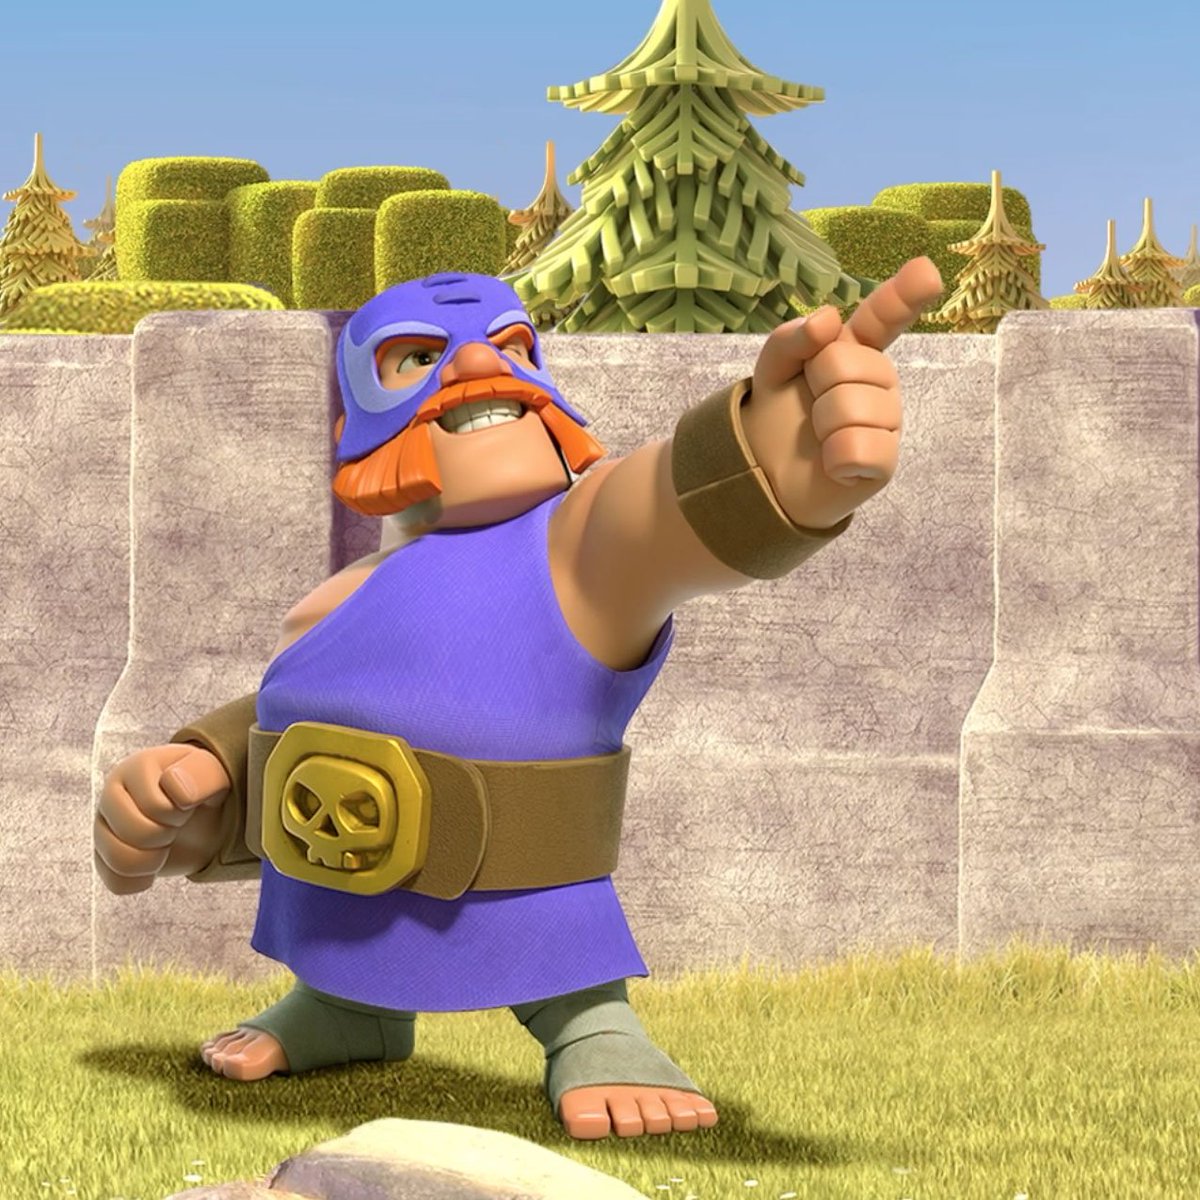 Clash Of Clans Ar Twitter Brawl Stars Has Gone Global The Strongman And His Clan Games Caravan Are Nowhere To Be Found And Rumors Of A Mysterious Masked Fighter With Superhuman Strength - el primo brawl stars buenas noches